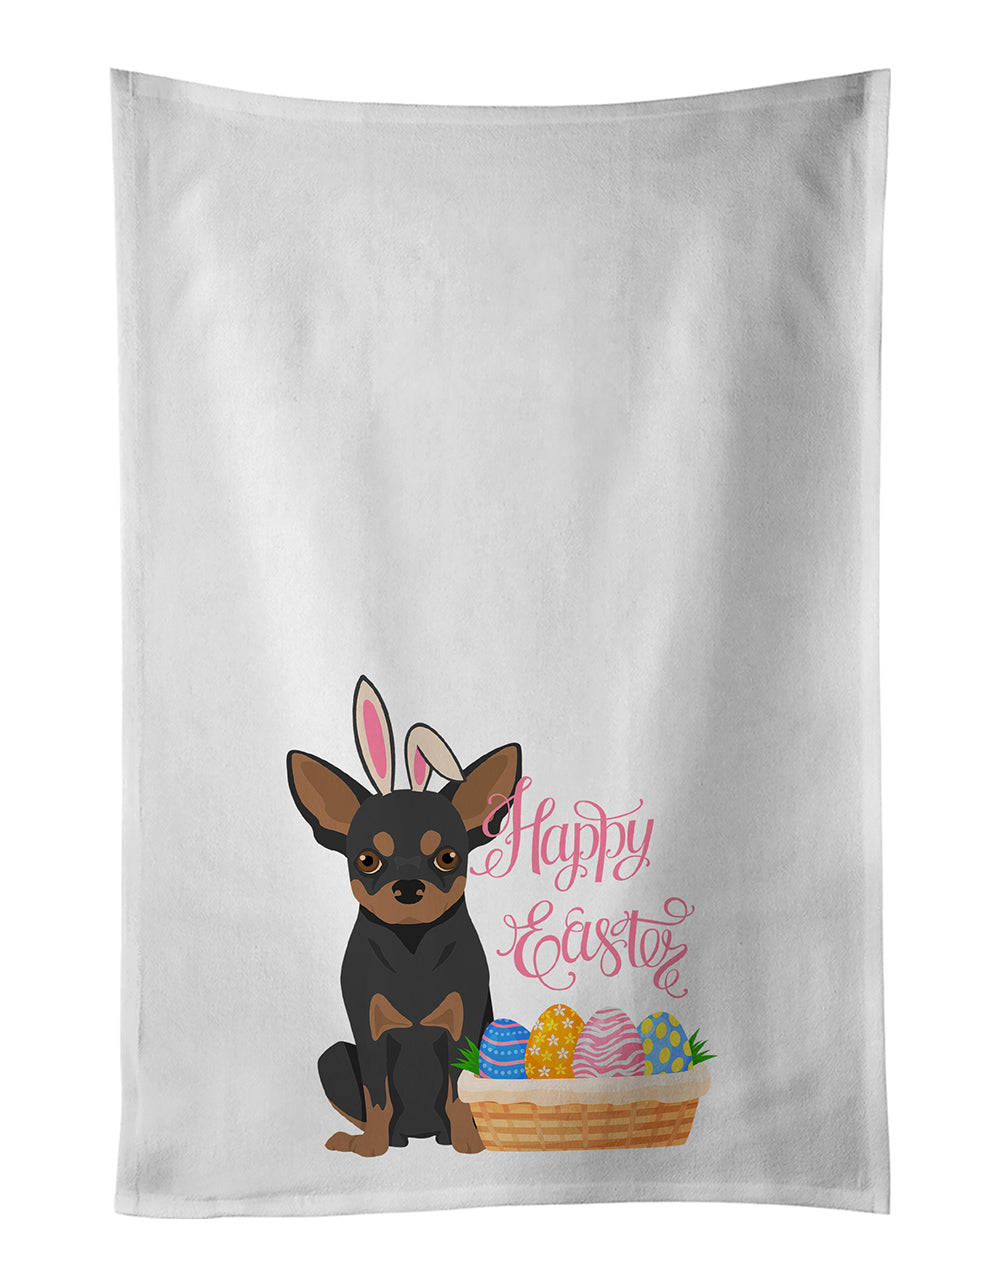 Buy this Black and Tan Chihuahua Easter White Kitchen Towel Set of 2 Dish Towels